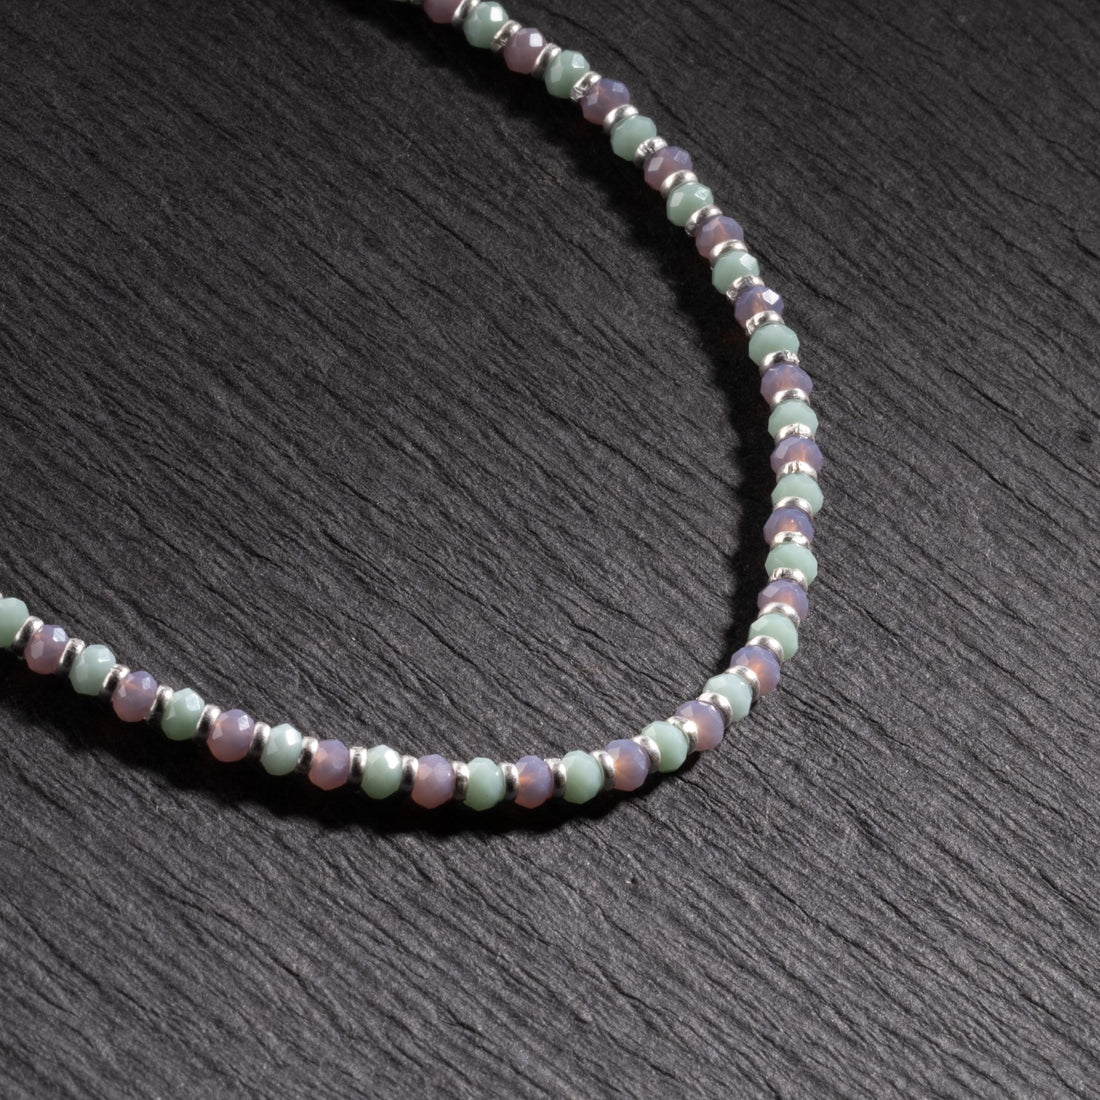 Pastel-colored silver Anklets for women